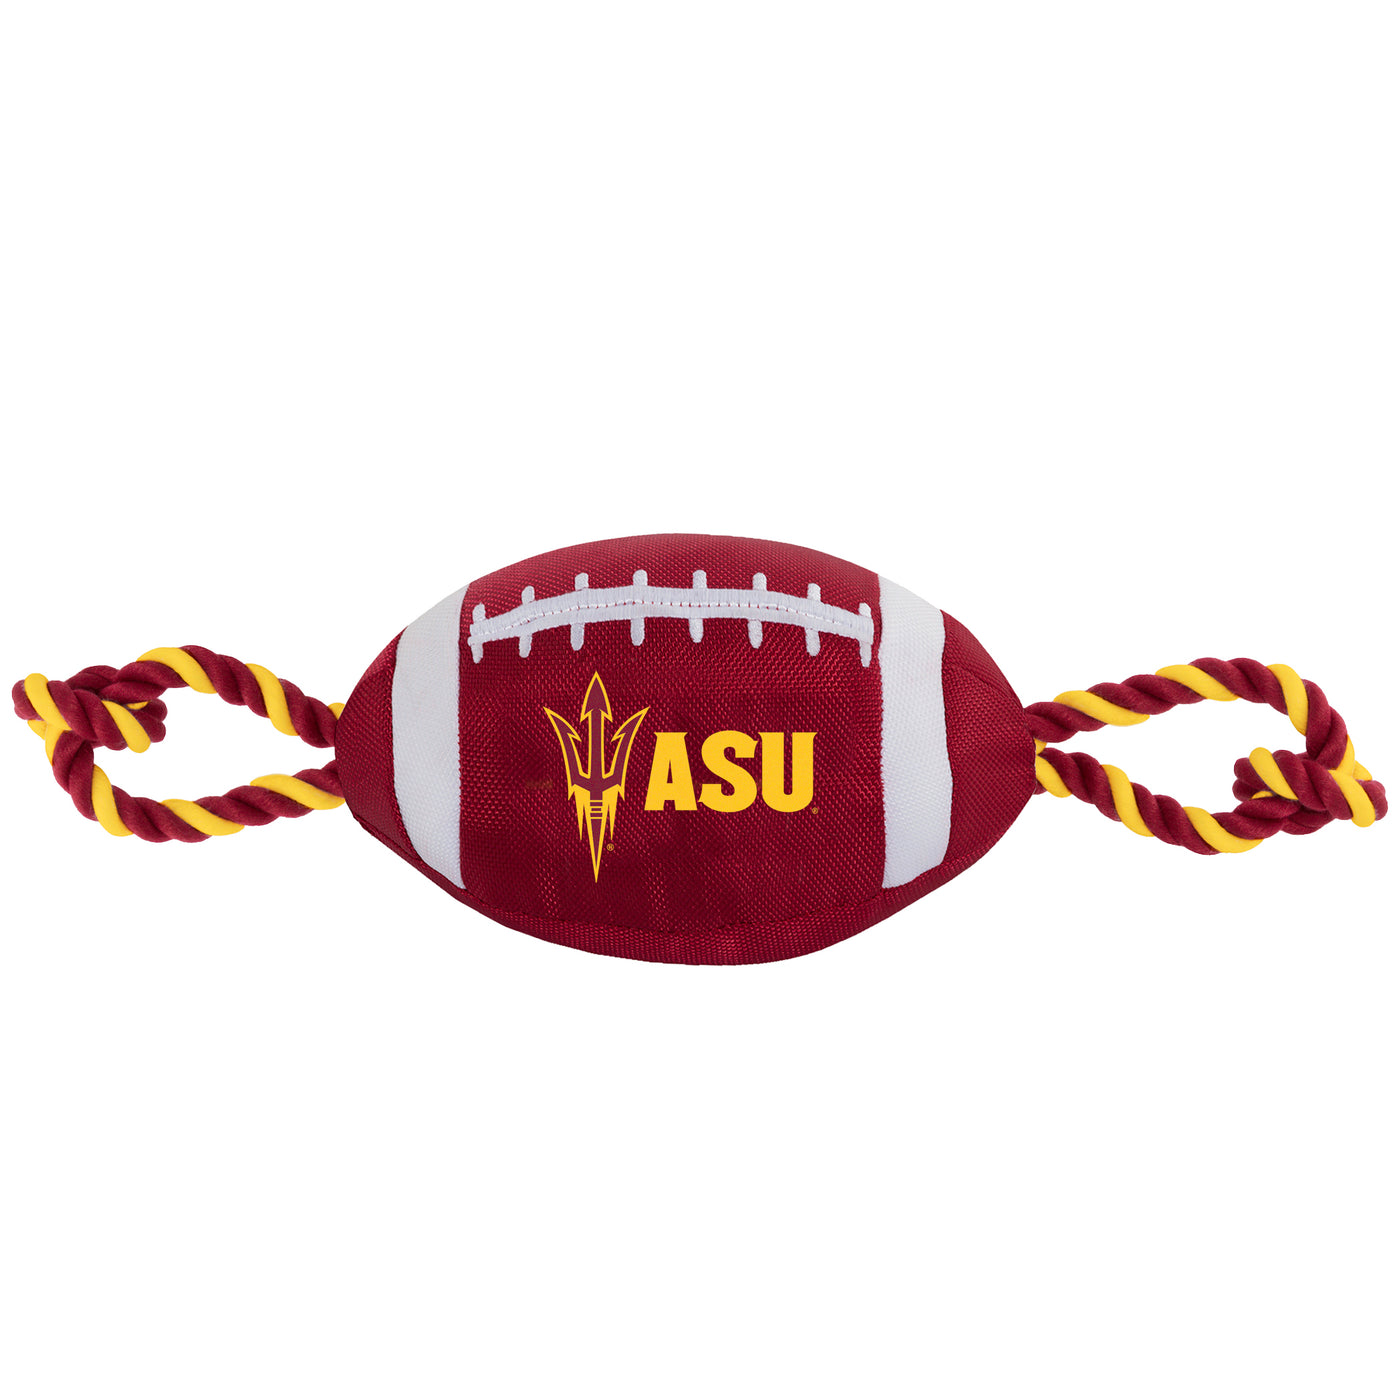 ASU maroon football dog toy with maroon and gold rope loop ends